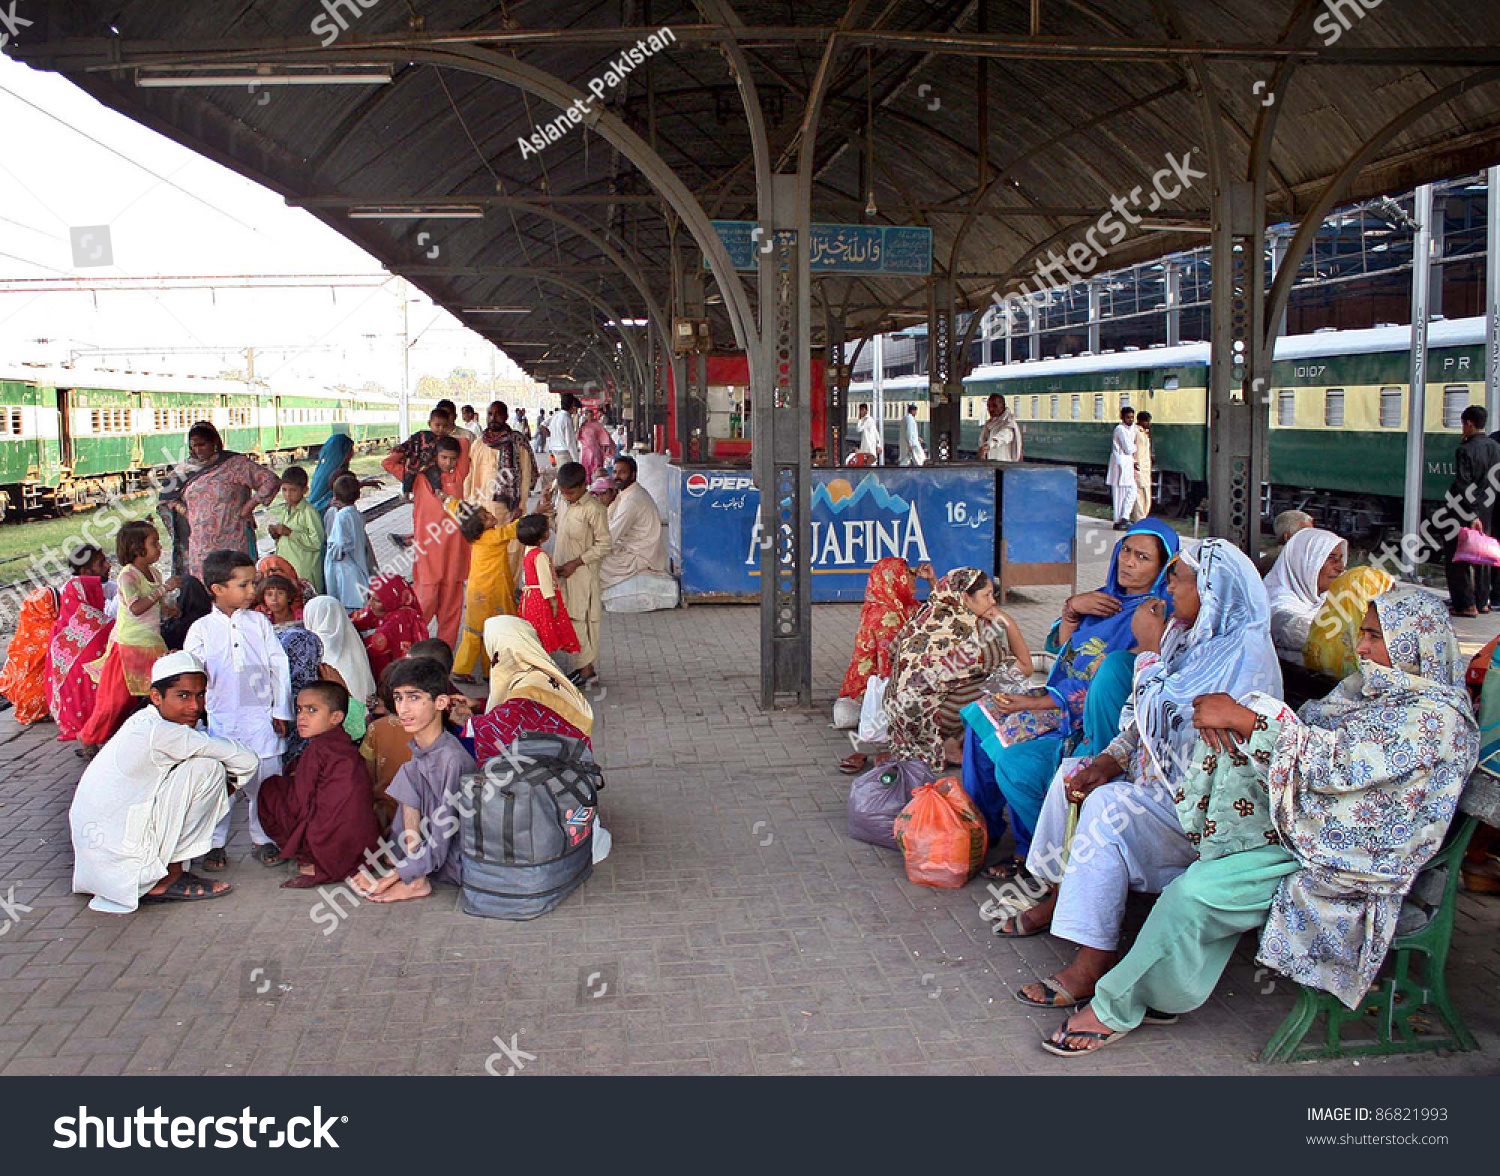 stock-photo-lahore-pakistan-oct-unidentified-passengers-seen-worried-at-lahore-railway-station-due-to-86821993.jpg